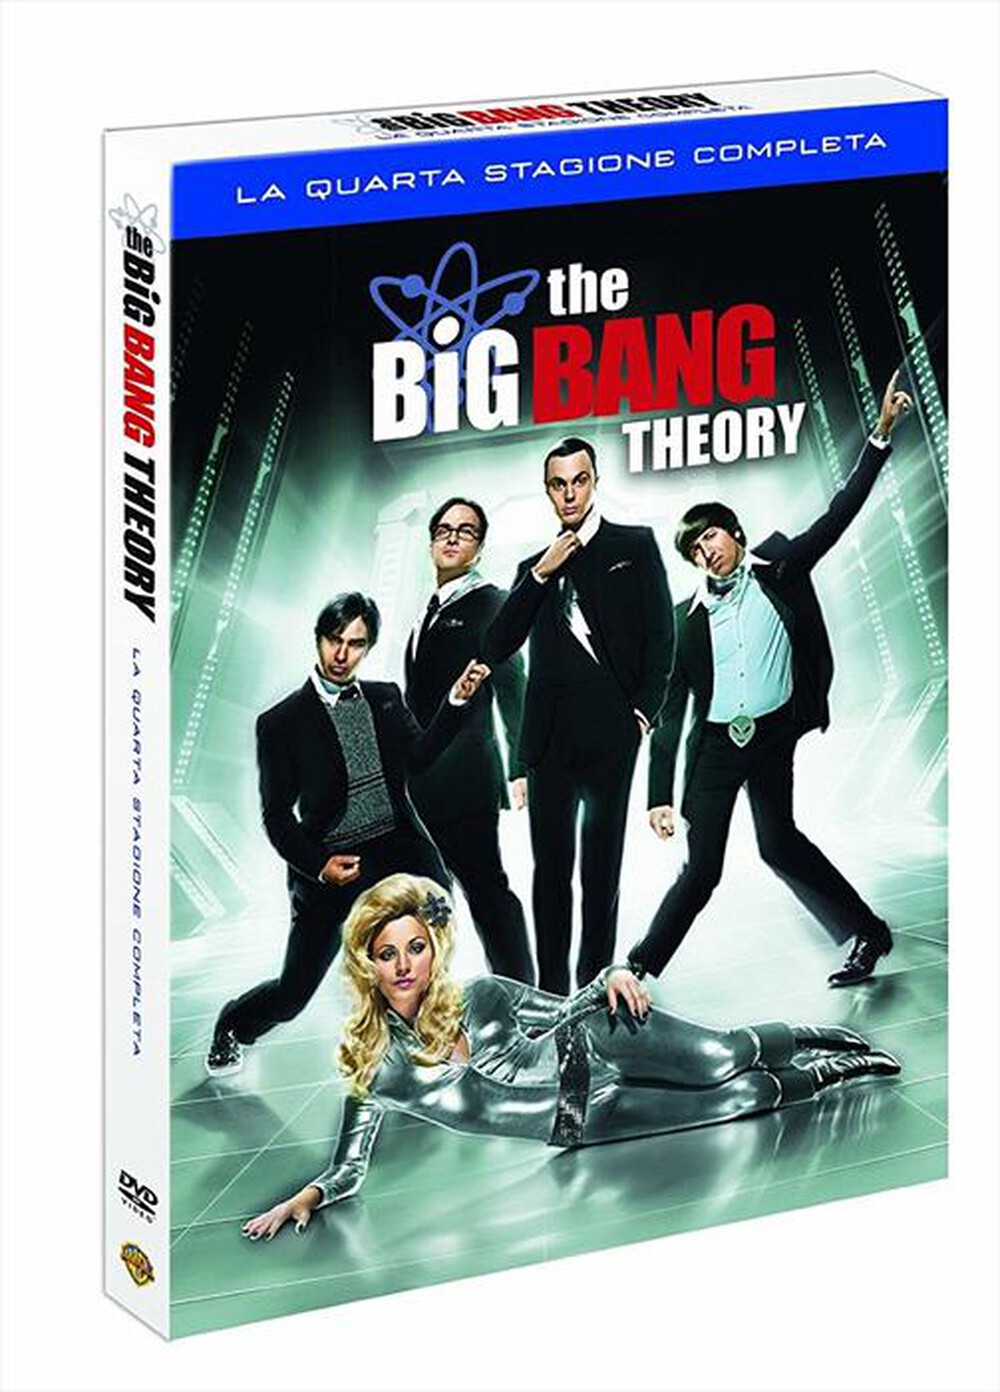 "WARNER HOME VIDEO - Big Bang Theory (The) - Stagione 04 (3 Dvd) - "